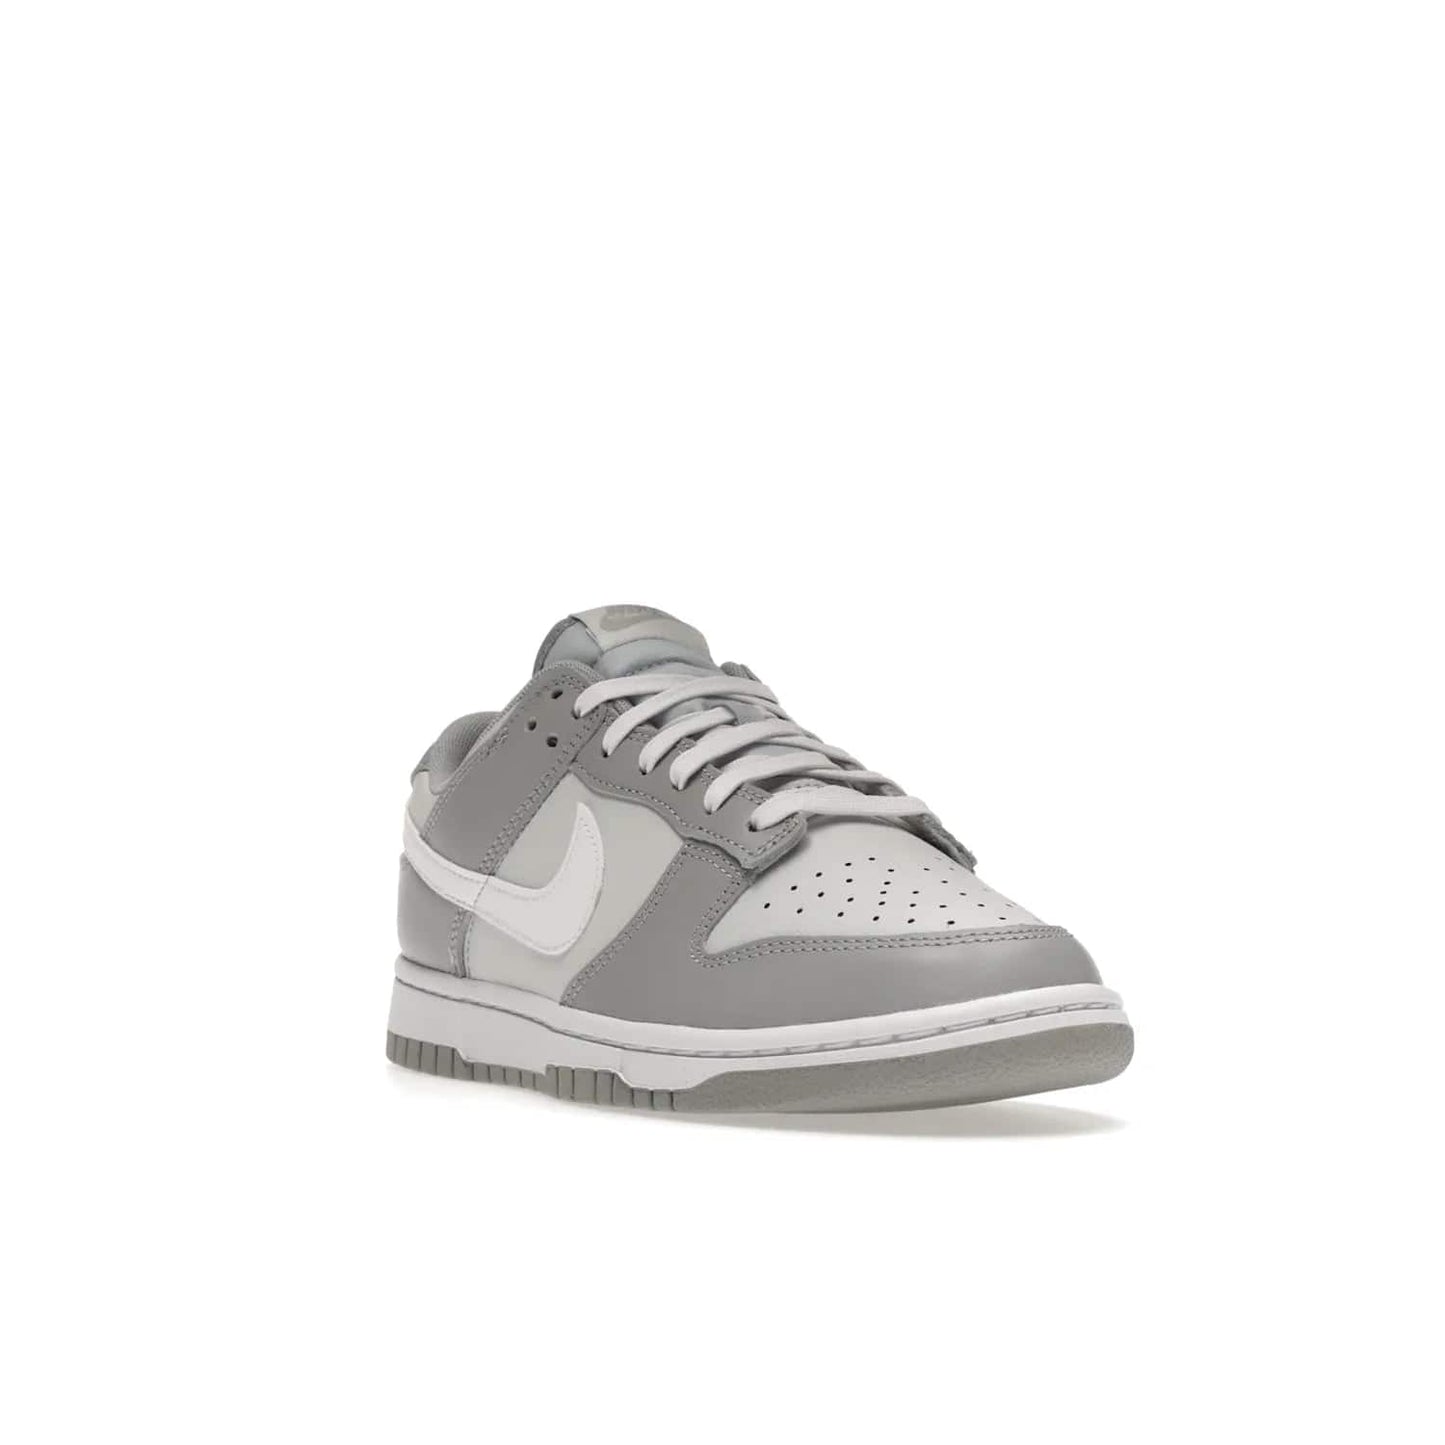 Nike Dunk Low Two Tone Grey - Image 7 - Only at www.BallersClubKickz.com - Fresh Nike Dunk Low Two Tone Grey leather/overlay Sneaker. White Swoosh detailing, nylon tongue, woven label and Air Sole. Get yours and stay on the trend.